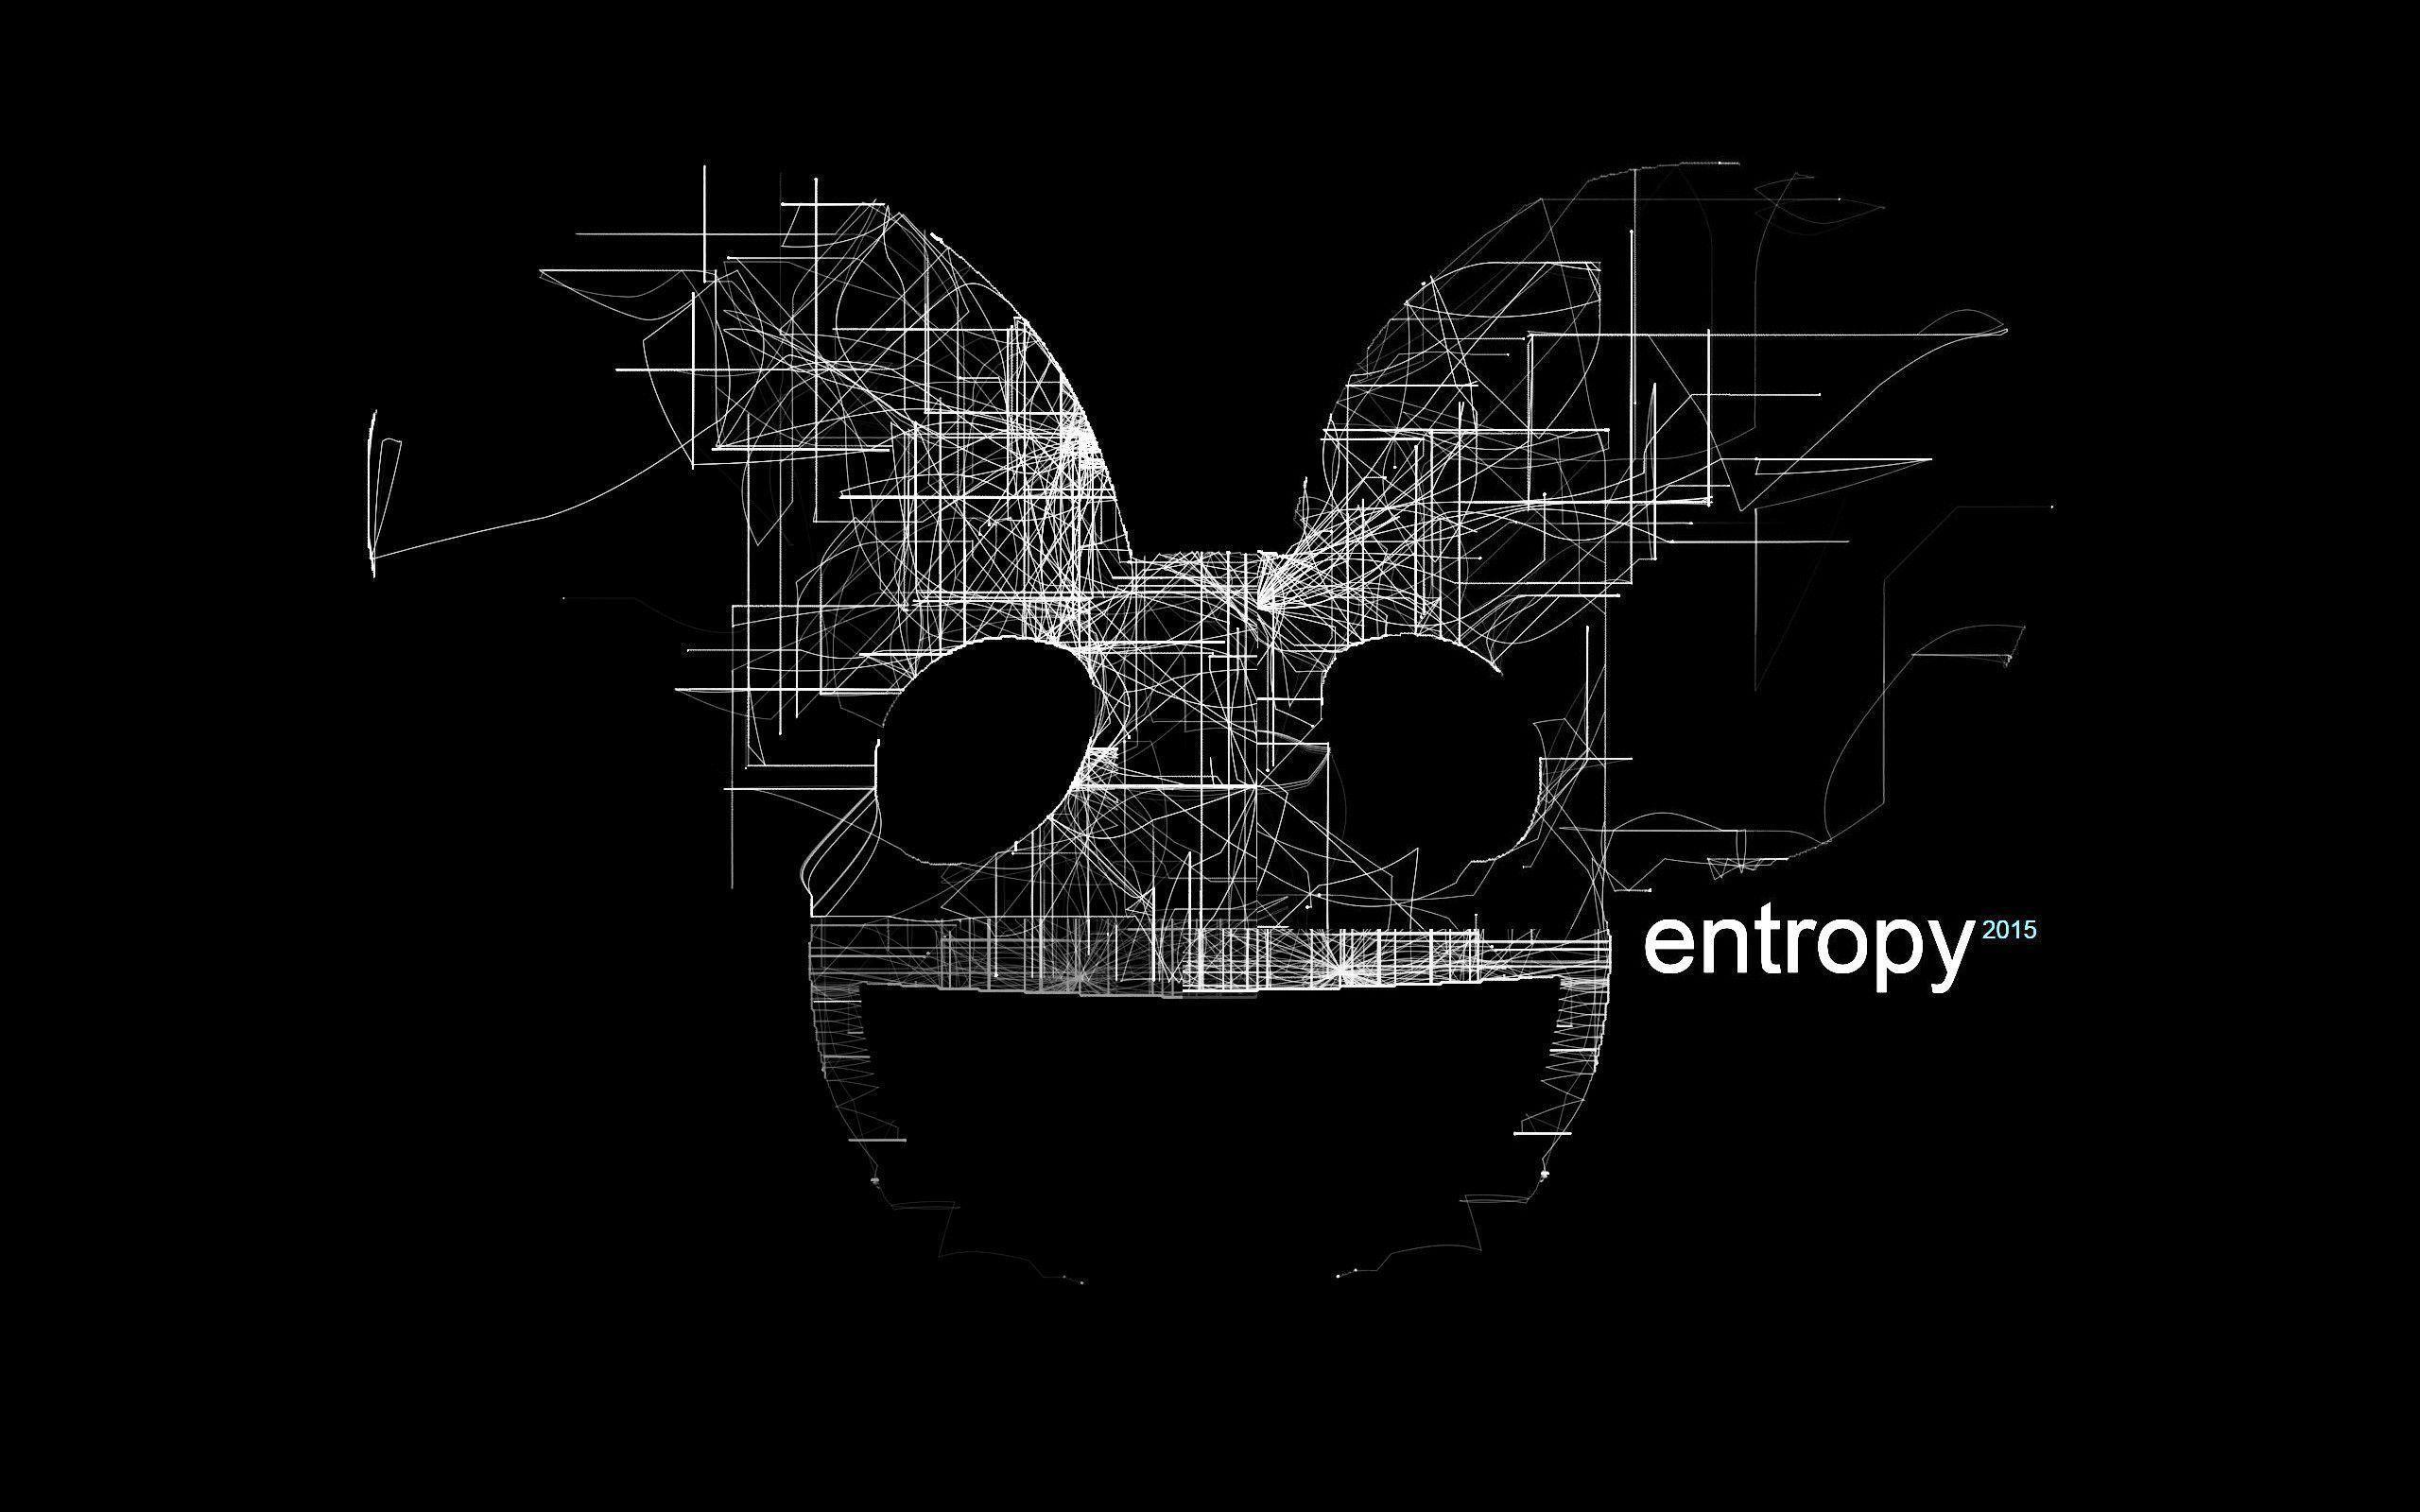 Quickly merged three teaser image Deadmau5 posted for his Entropy